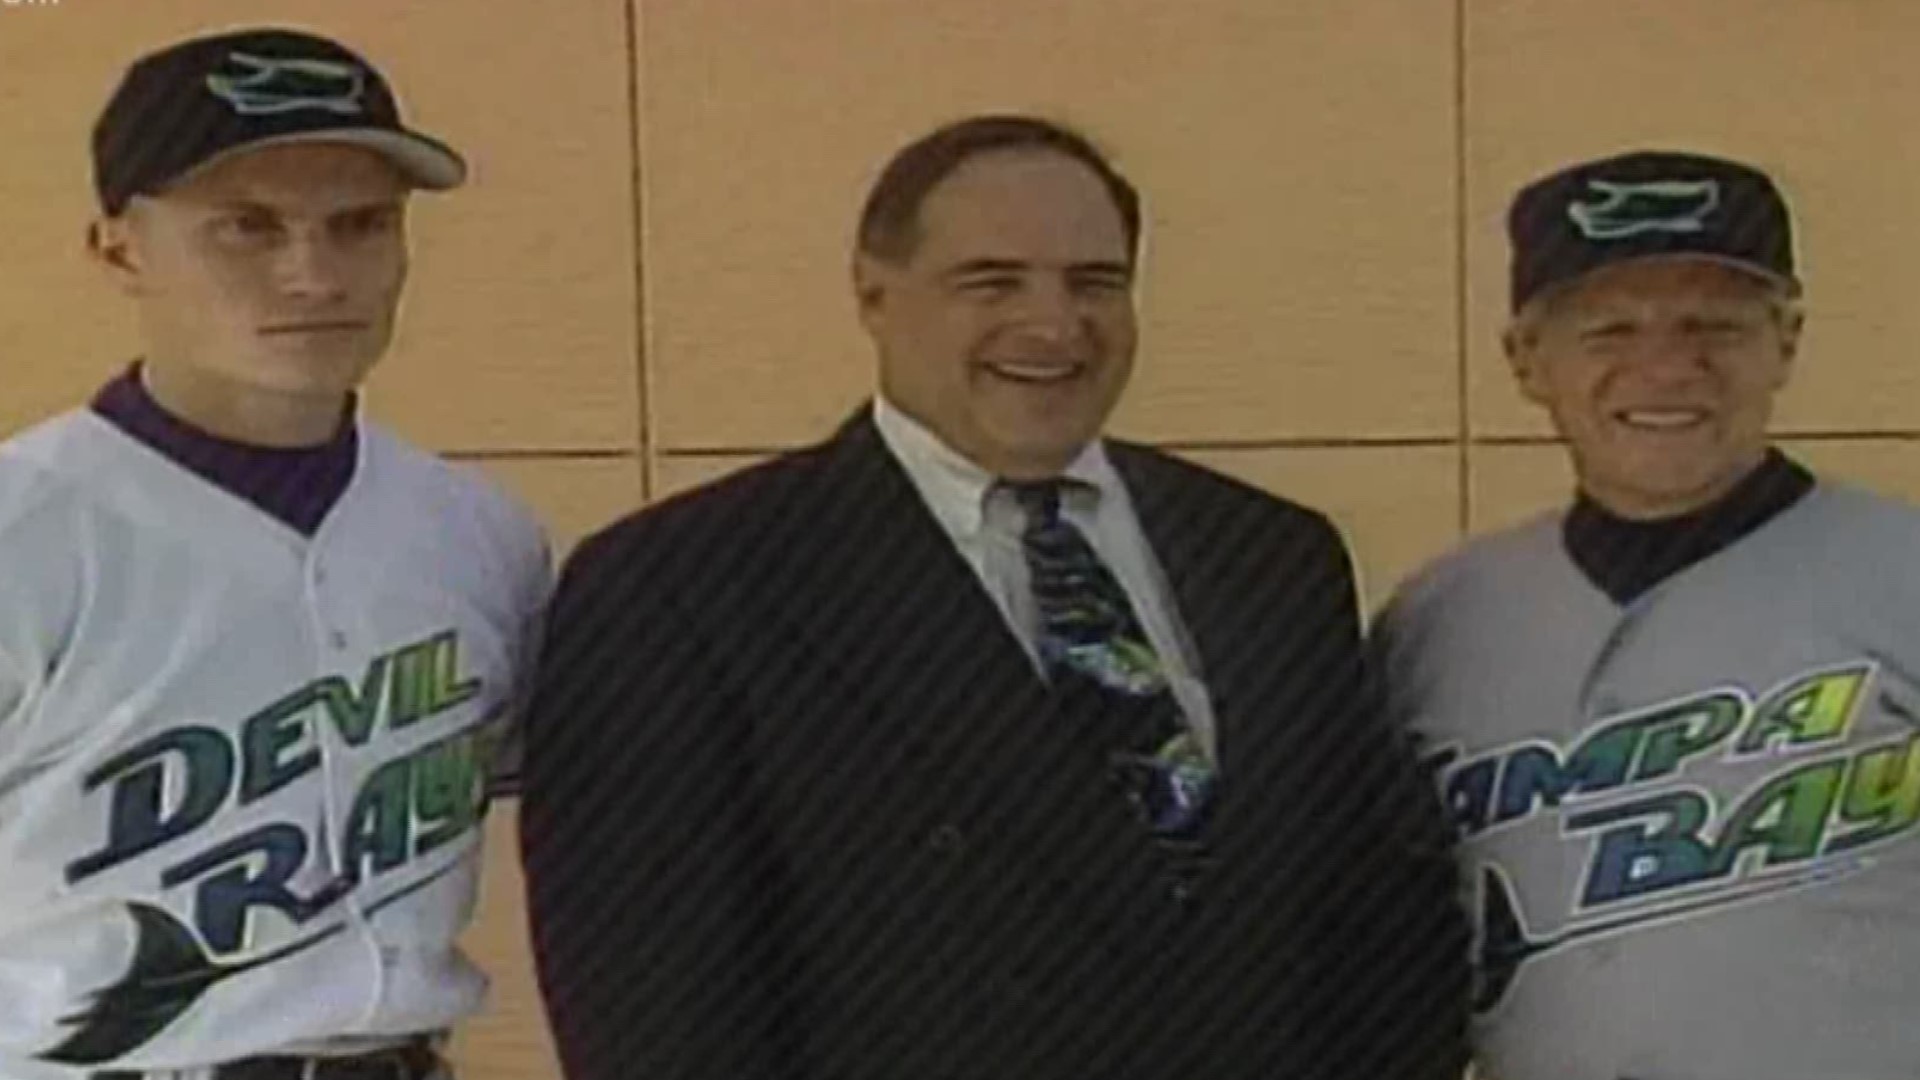 Vincent Naimoli, the first owner of the then-Tampa Bay Devil Rays, died Sunday night. https://on.wtsp.com/2ZBPDJP